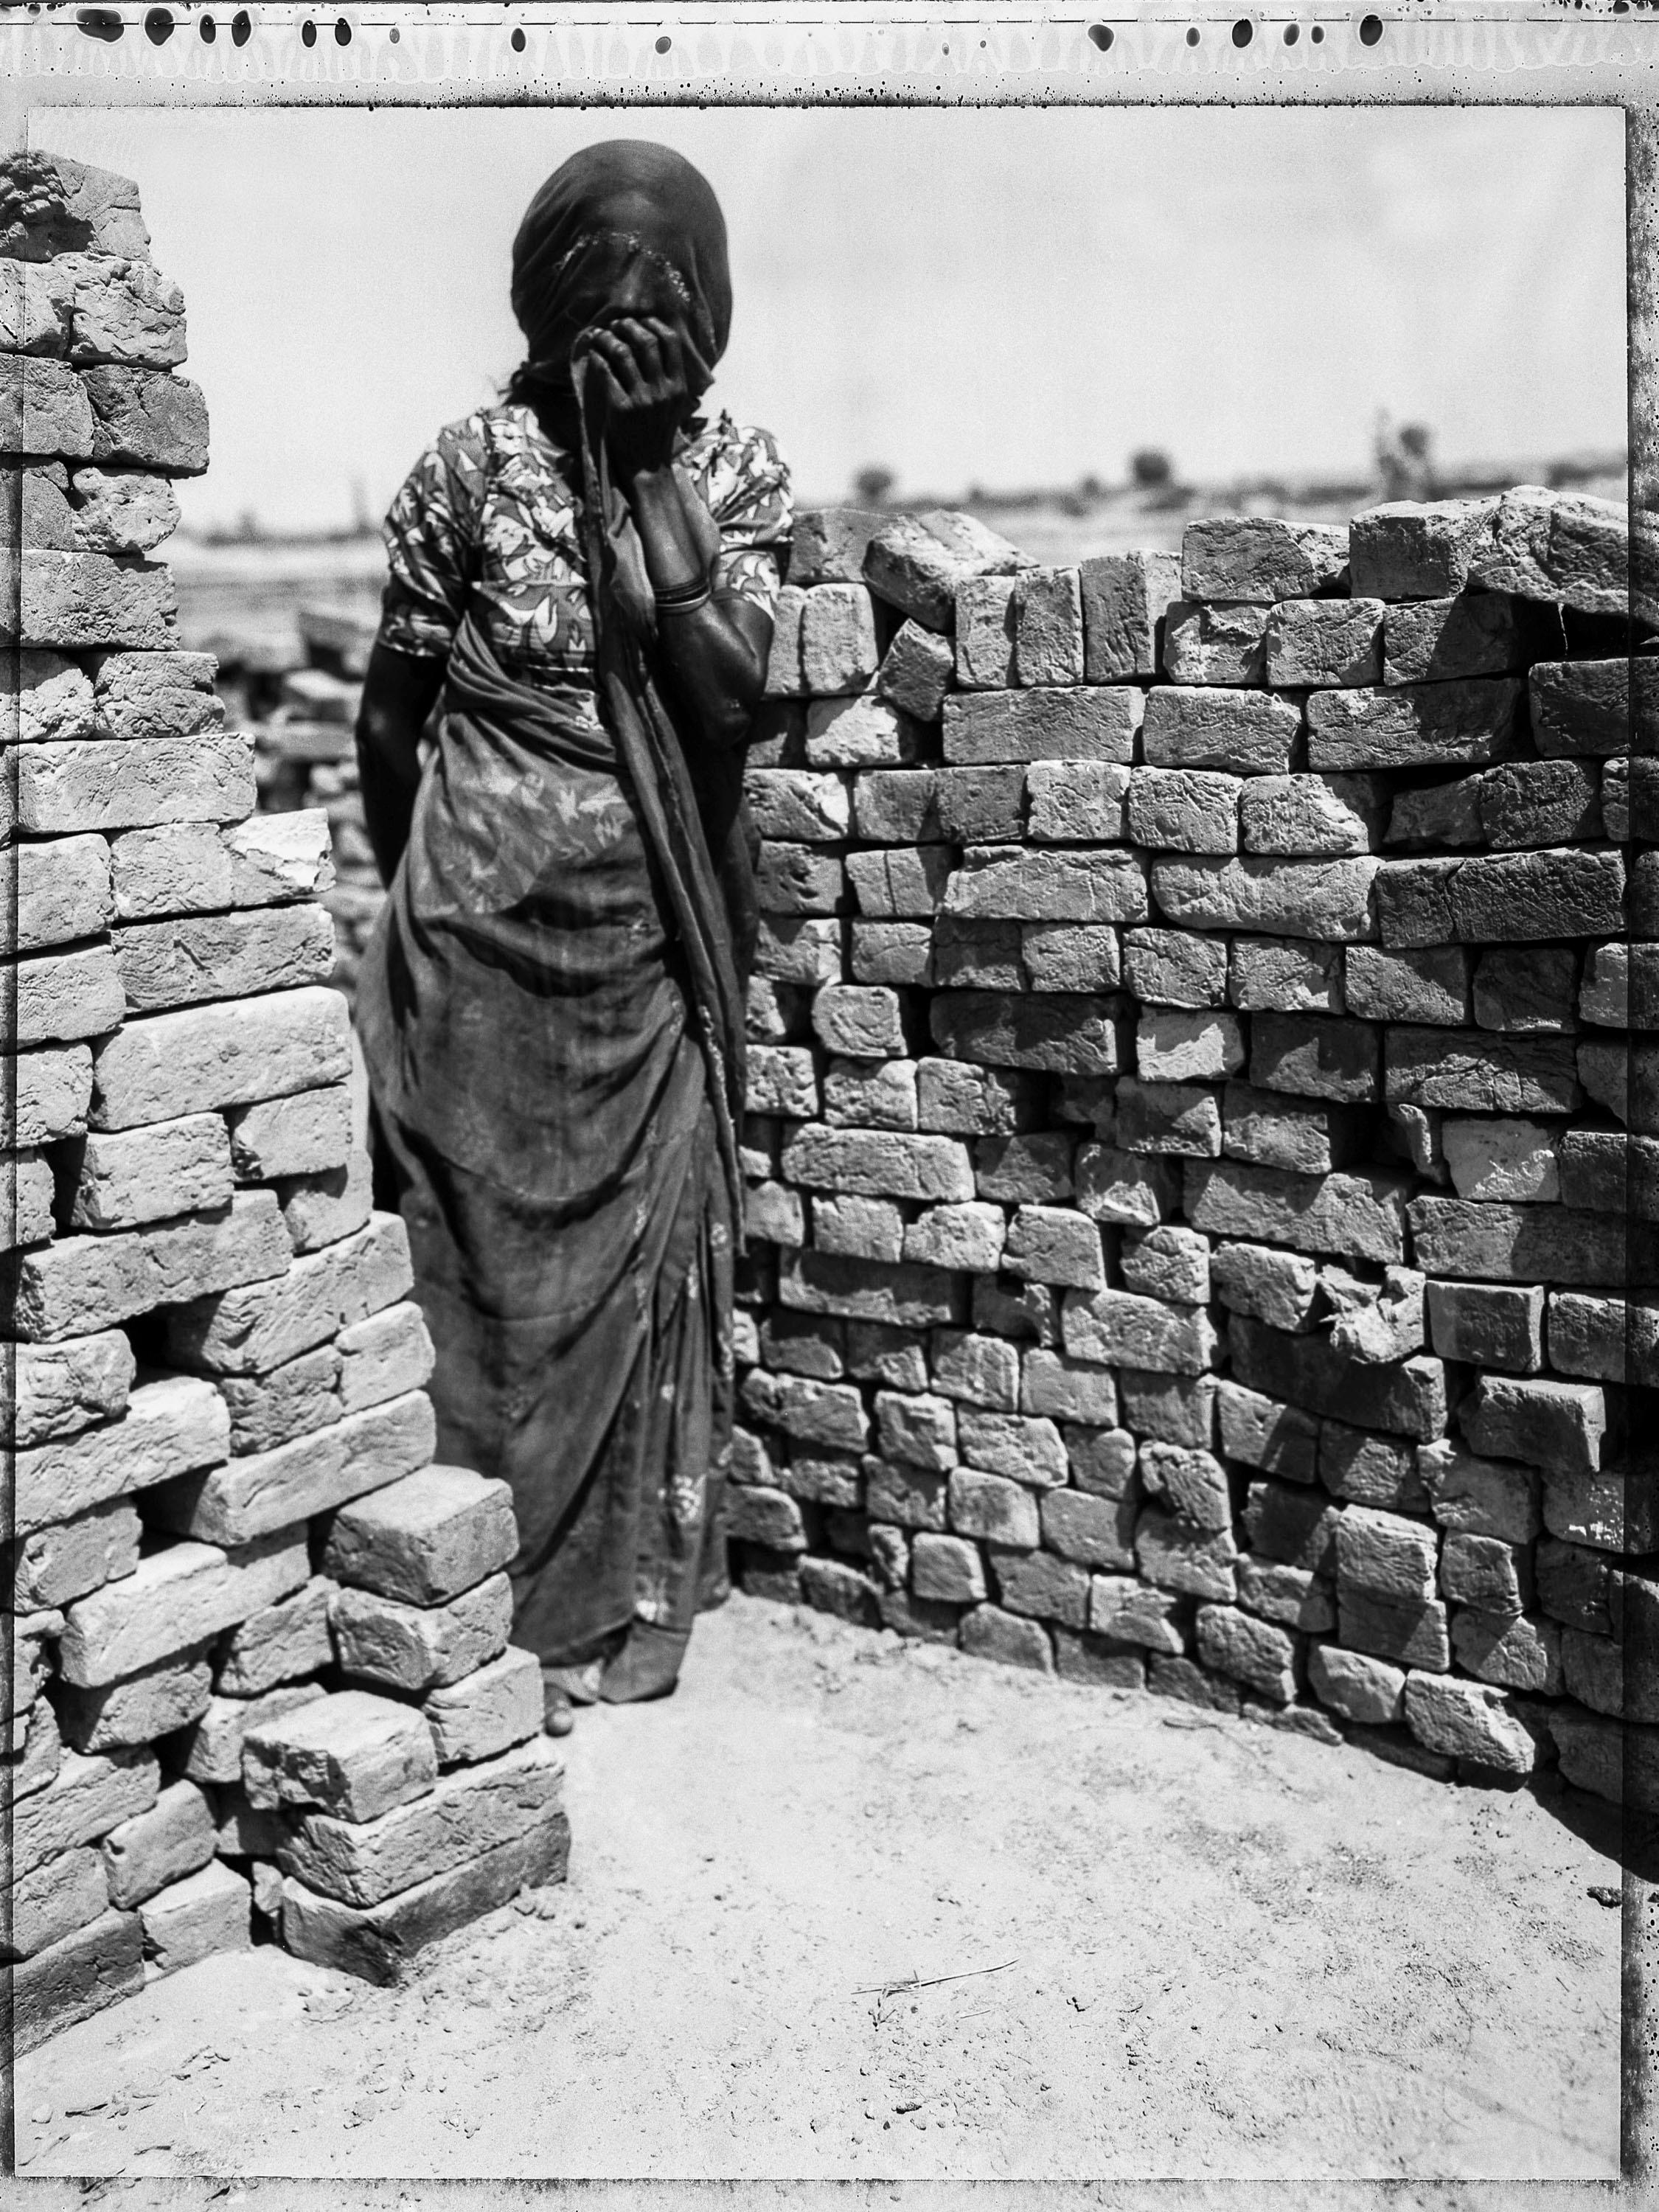 Carlo Bevilacqua Black and White Photograph - Indian woman in a bricksfactory - Rajastan - India (from  Indian Stills series)